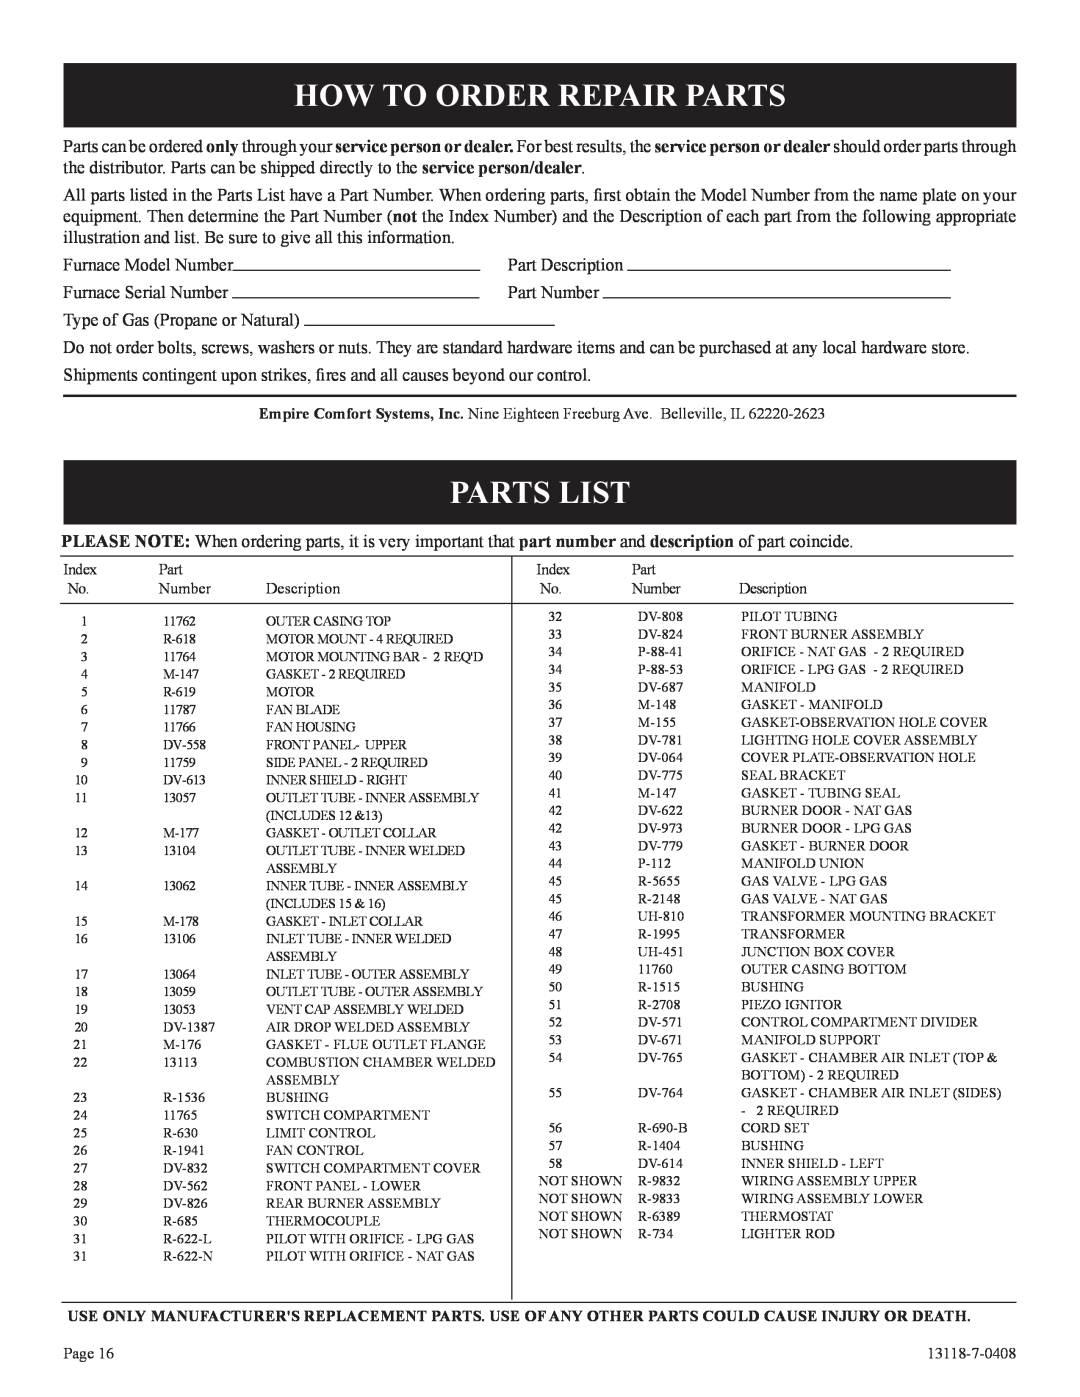 Empire Comfort Systems DV-55T-1 installation instructions How To Order Repair Parts, Parts List 